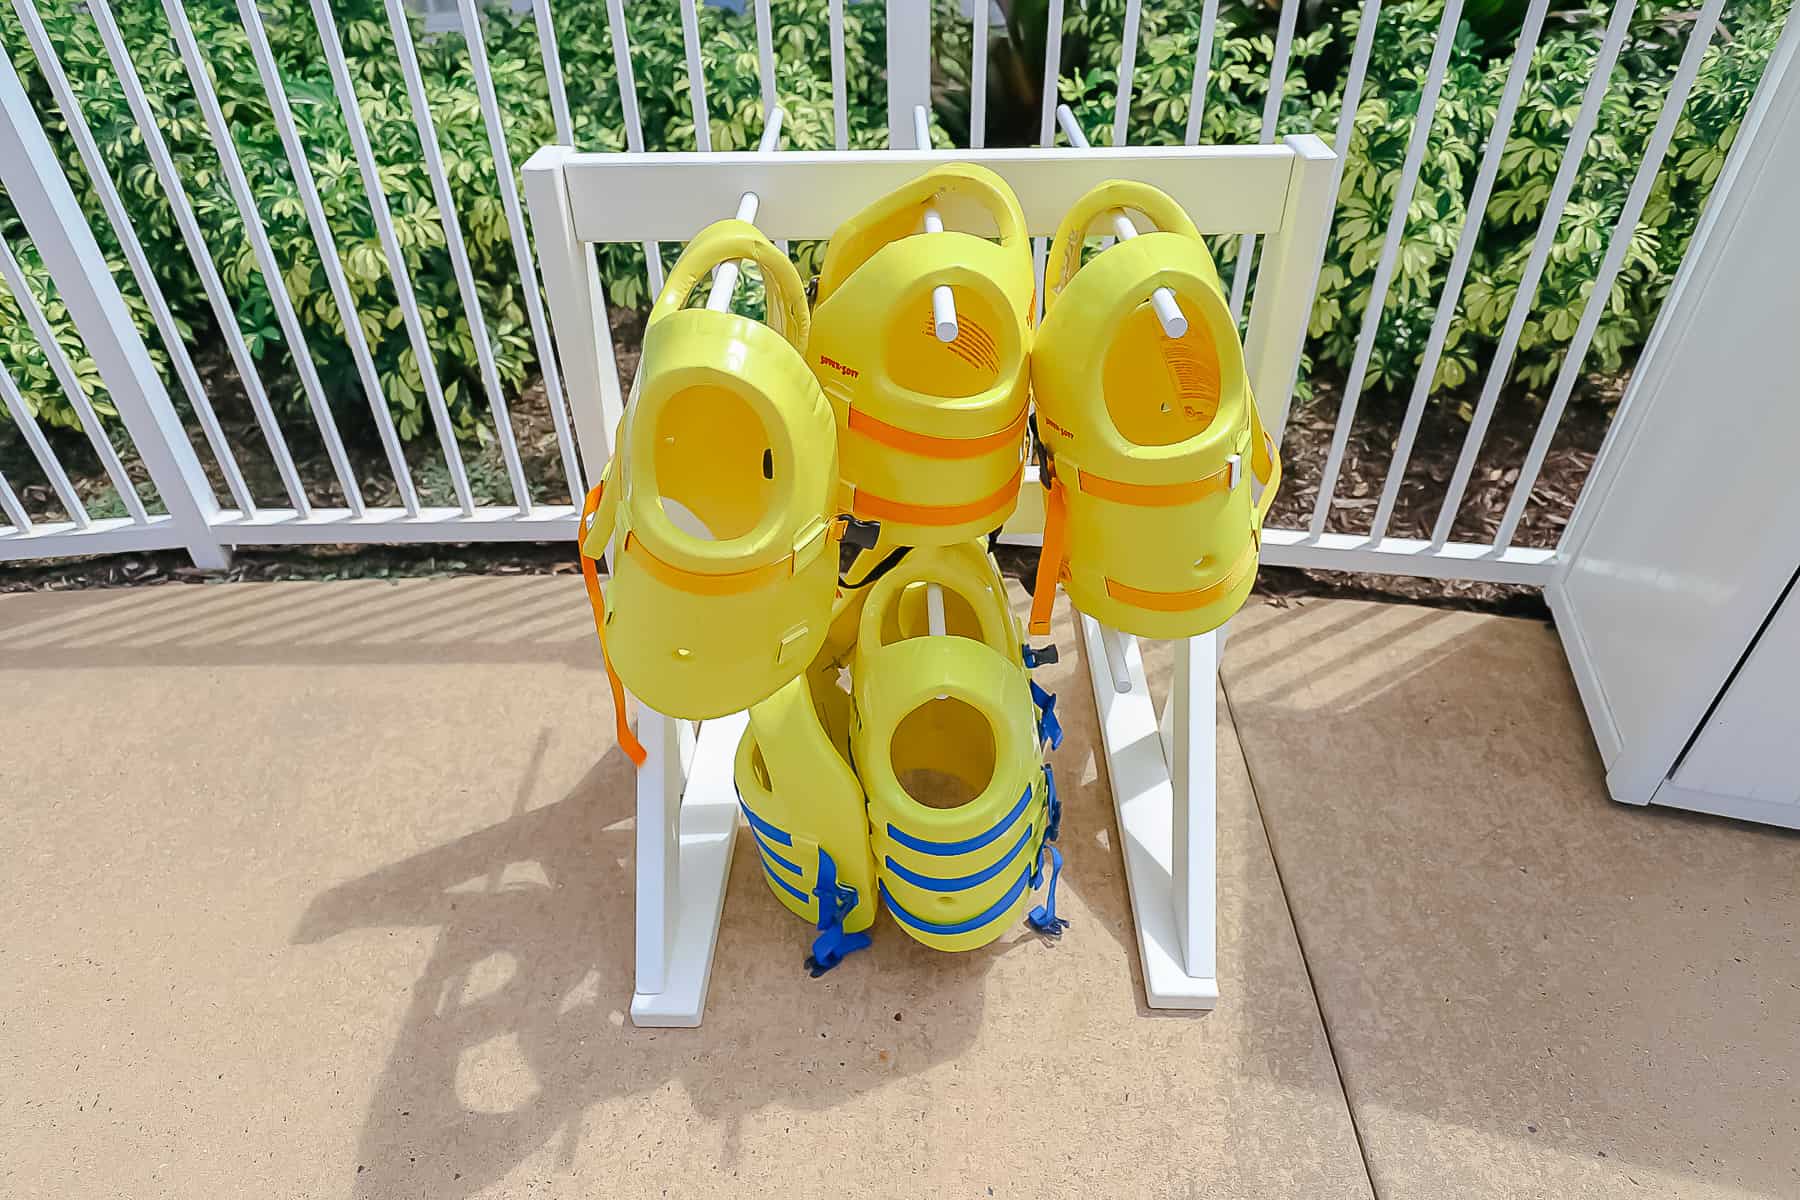 complimentary lifejacket stand near the pool